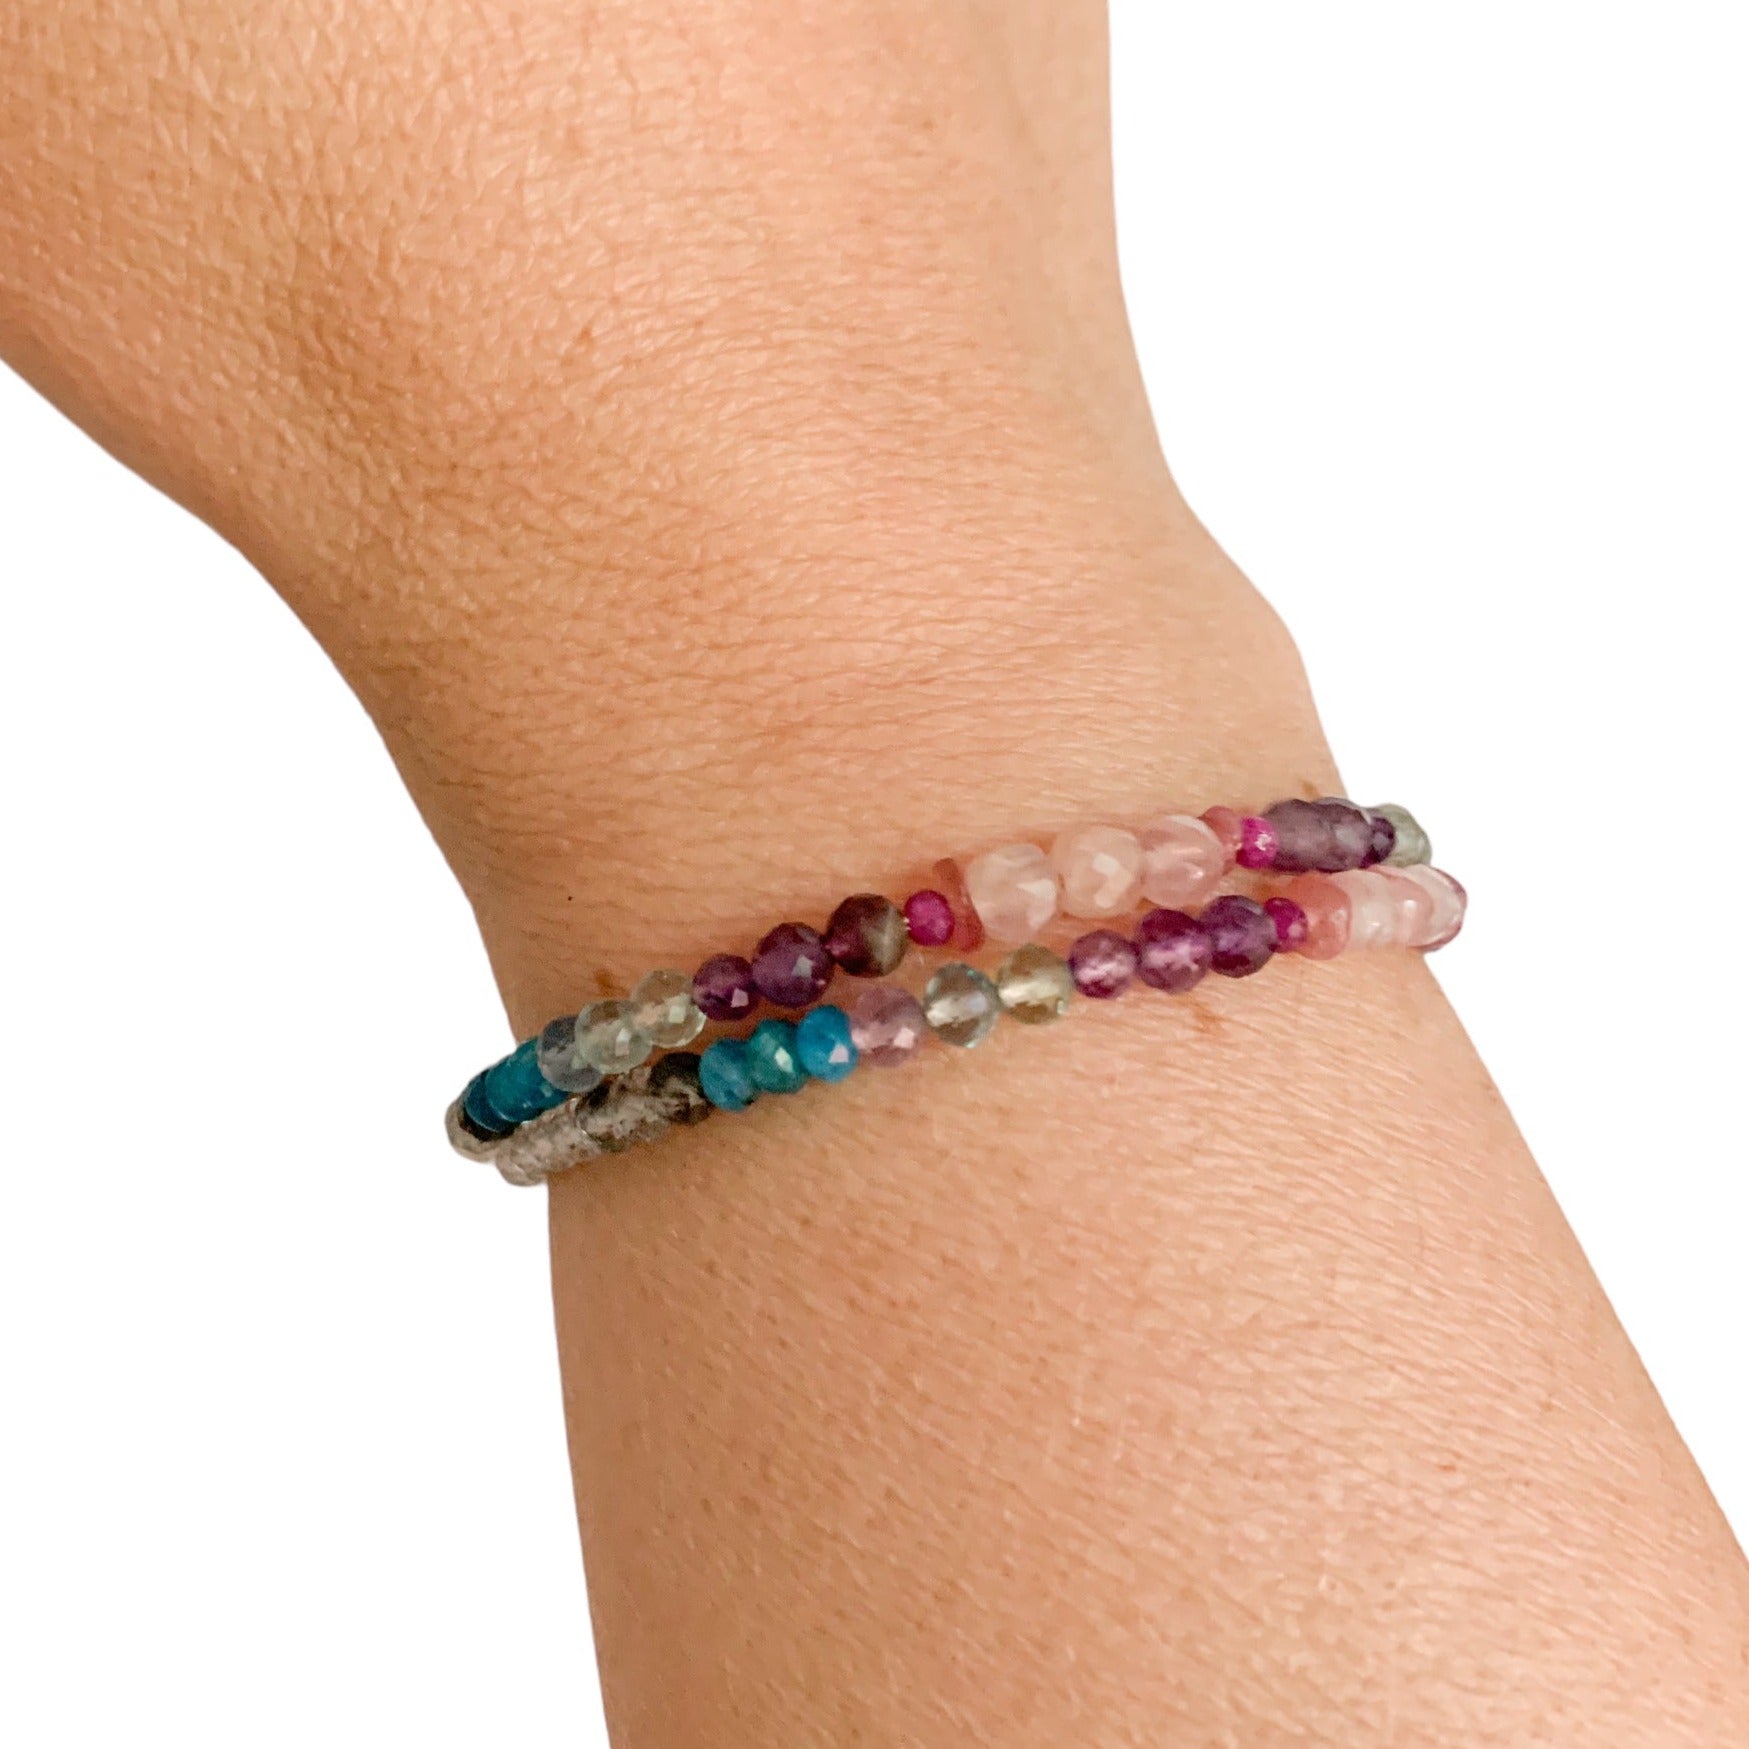 Versatile Serenity Bracelet, perfect for any outfit